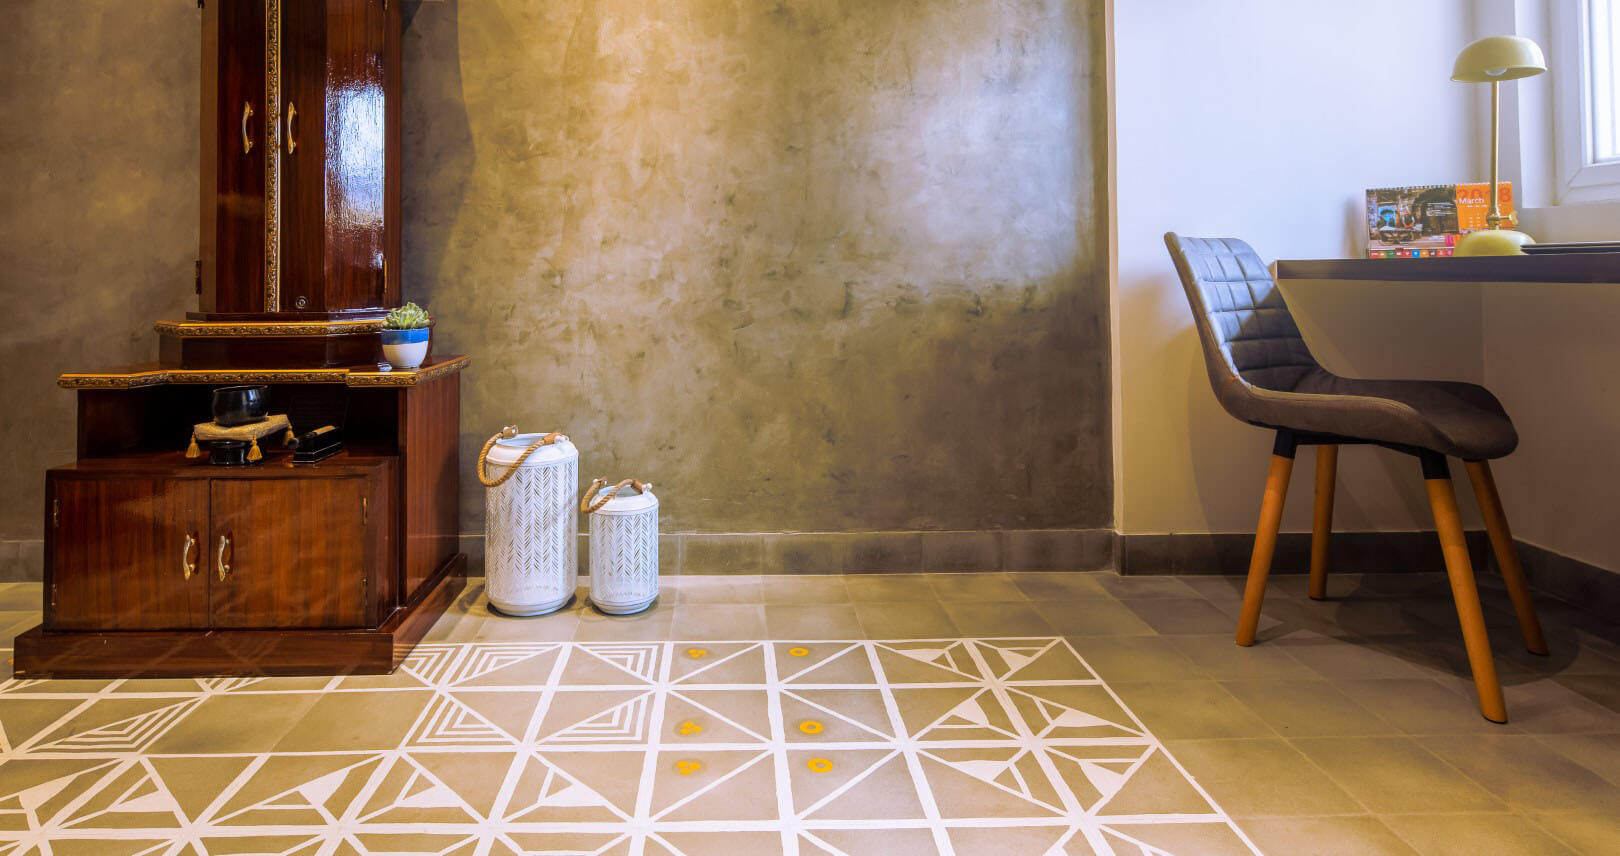 Bharat Floorings makes handcrafted cement floors. Each floor is unique and customized.